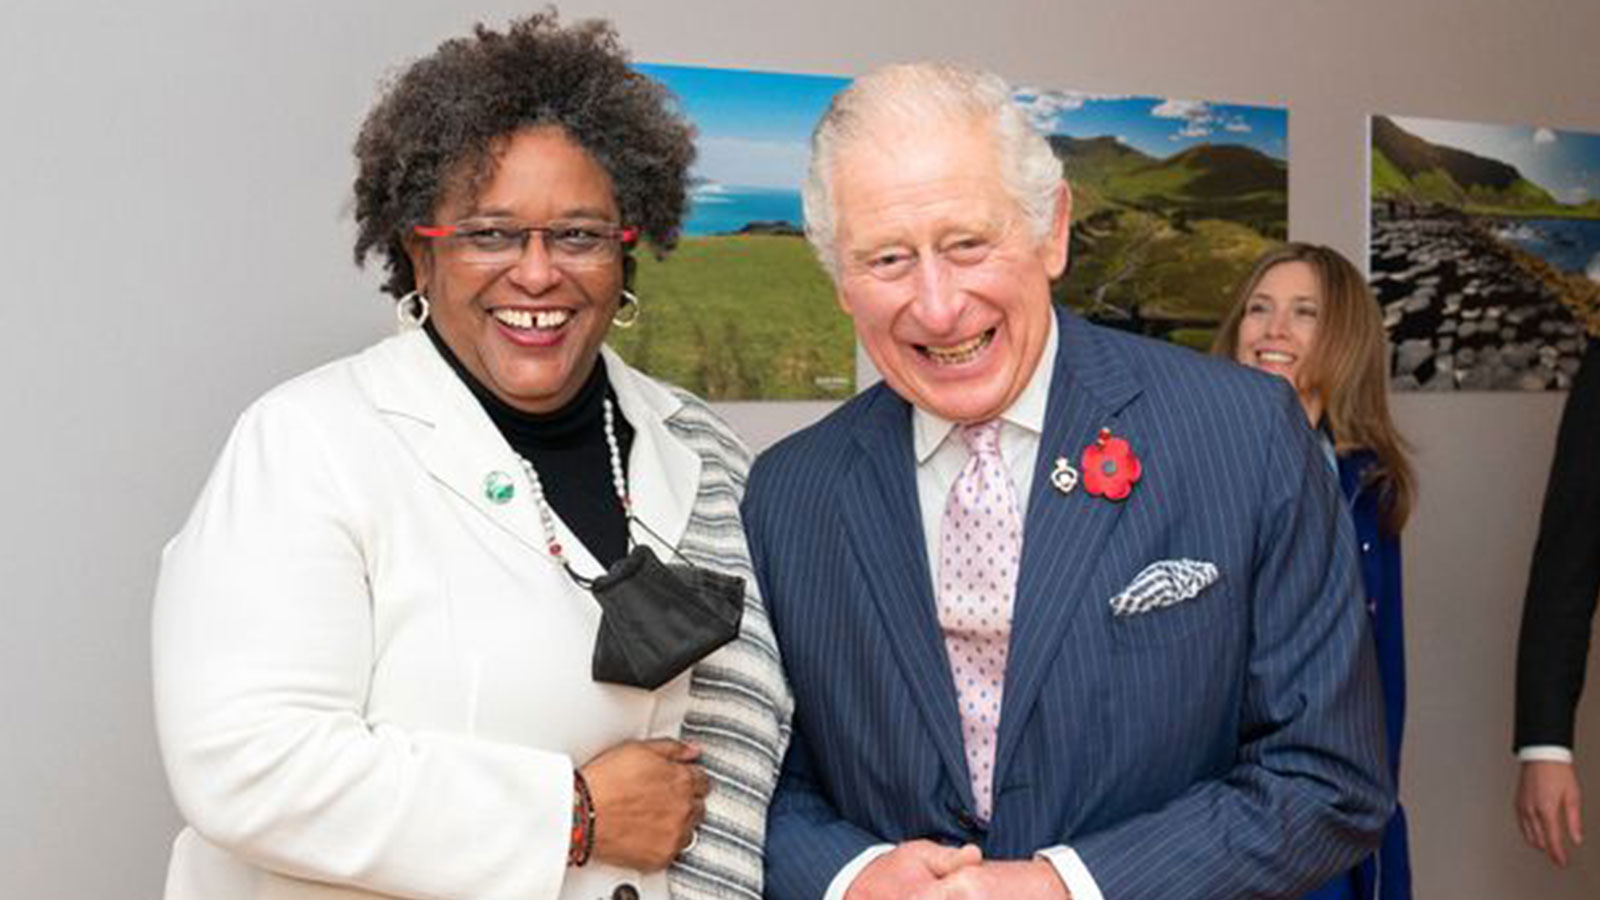 Prince Charles greets the Prime Minister of Barbados Mia Amor Mottley ahead of their bilateral during the Cop26 summit 